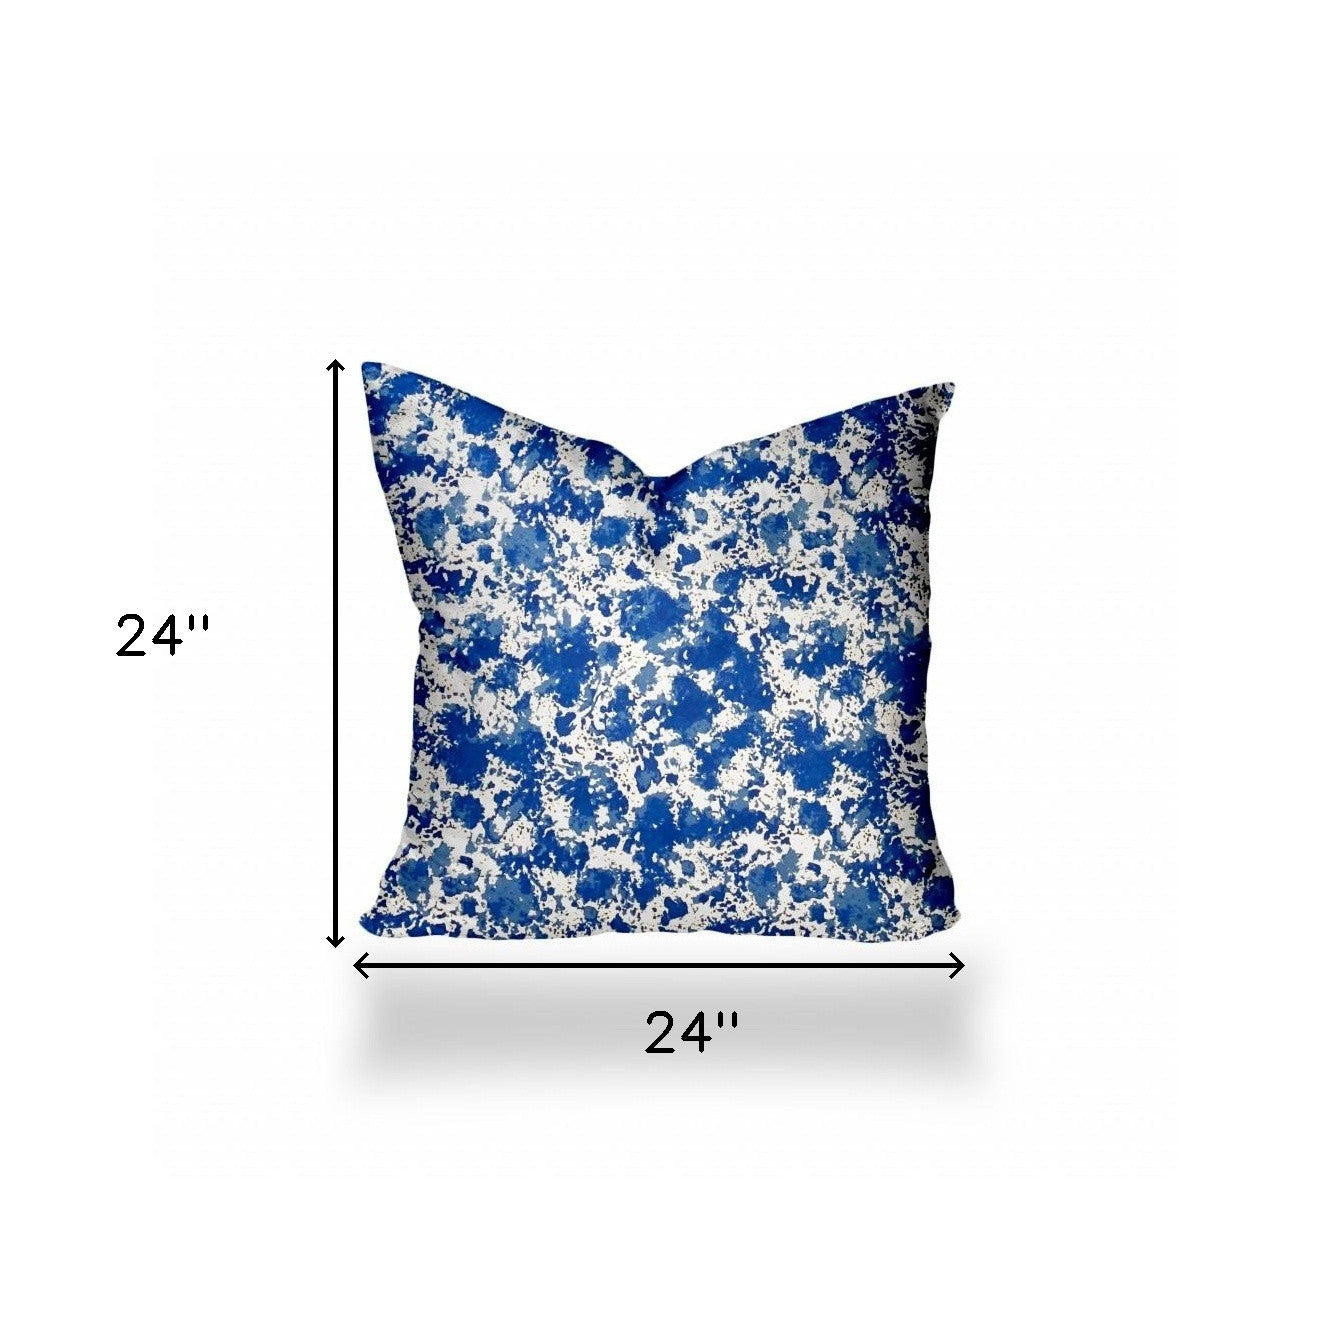 24" X 24" Blue And White Zippered Coastal Throw Indoor Outdoor Pillow